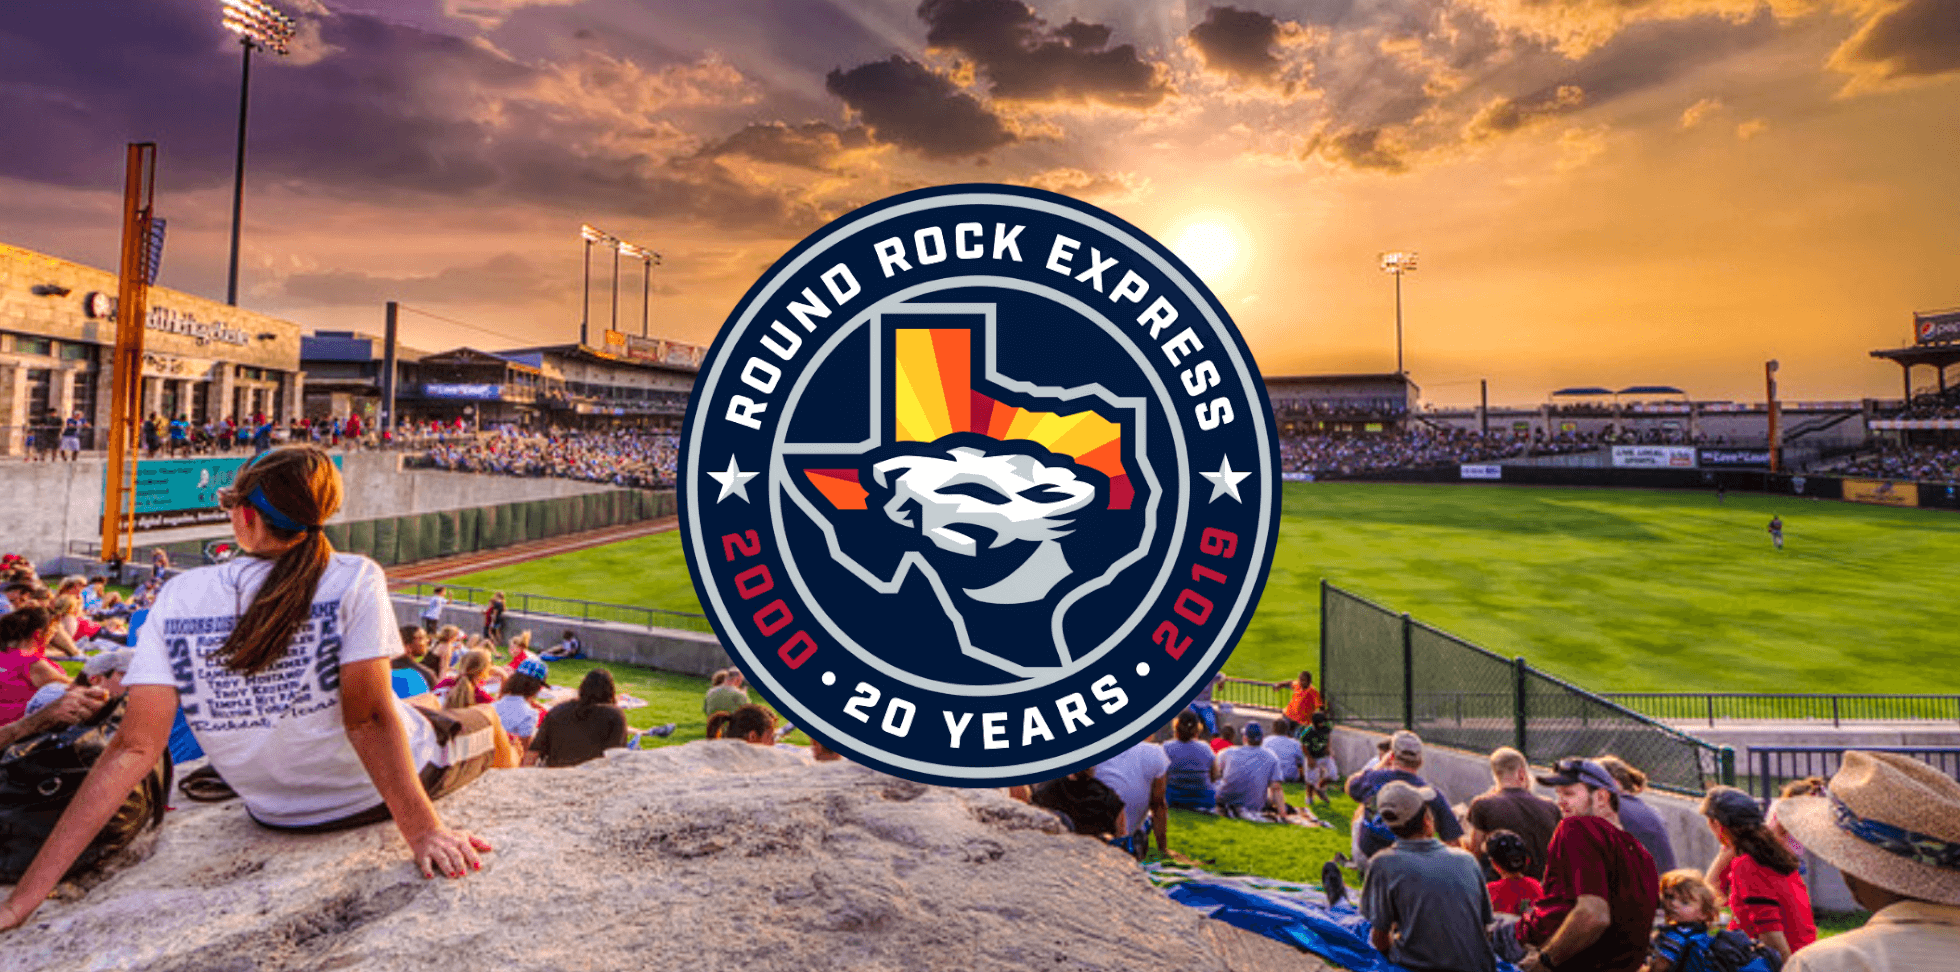 Jobs with the round rock express